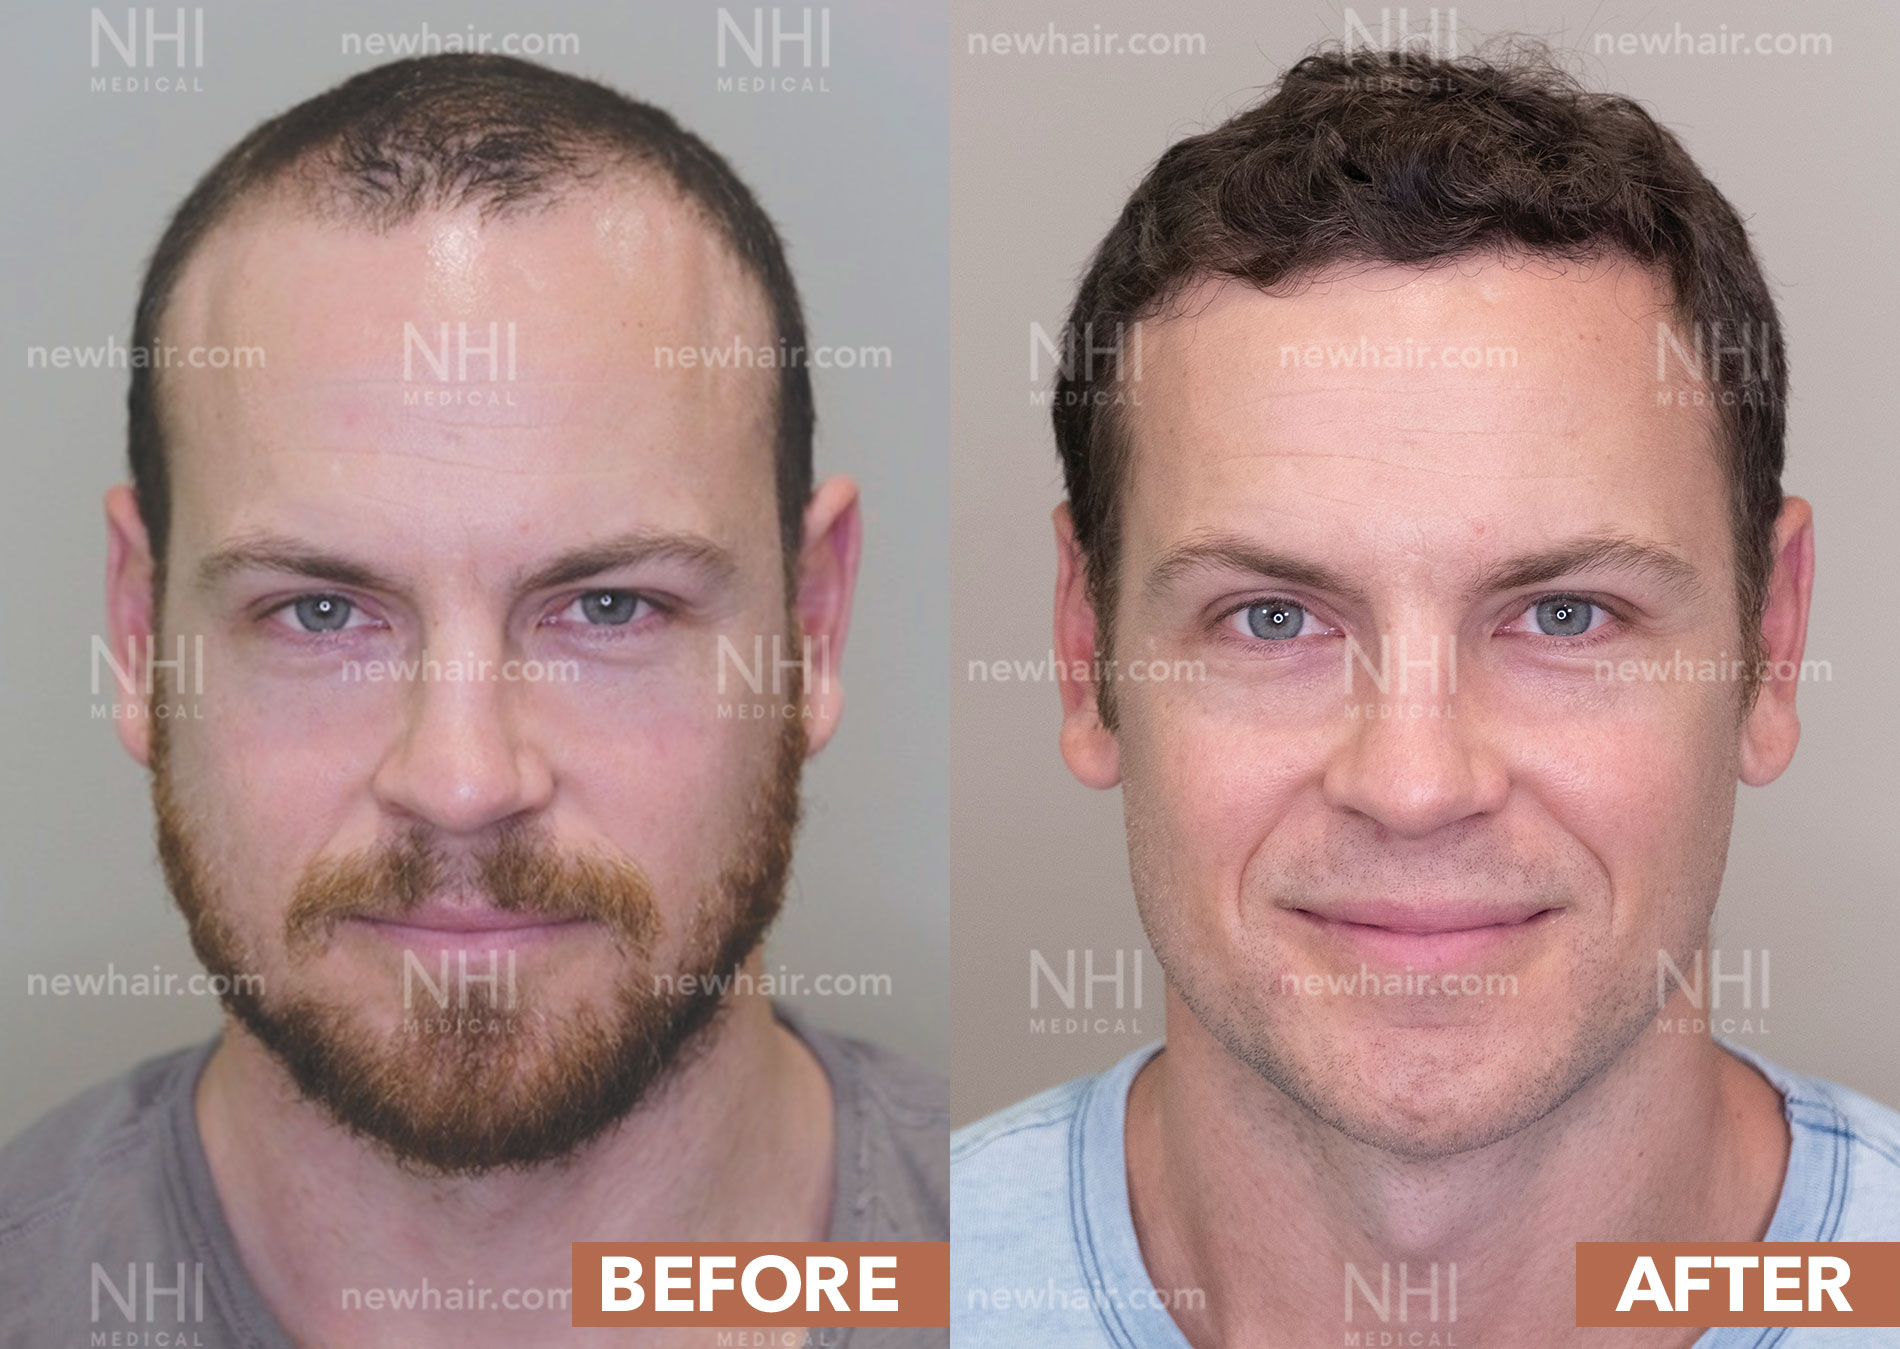 The Most Advanced Hair Transplant Method for Hair Loss (FUE)